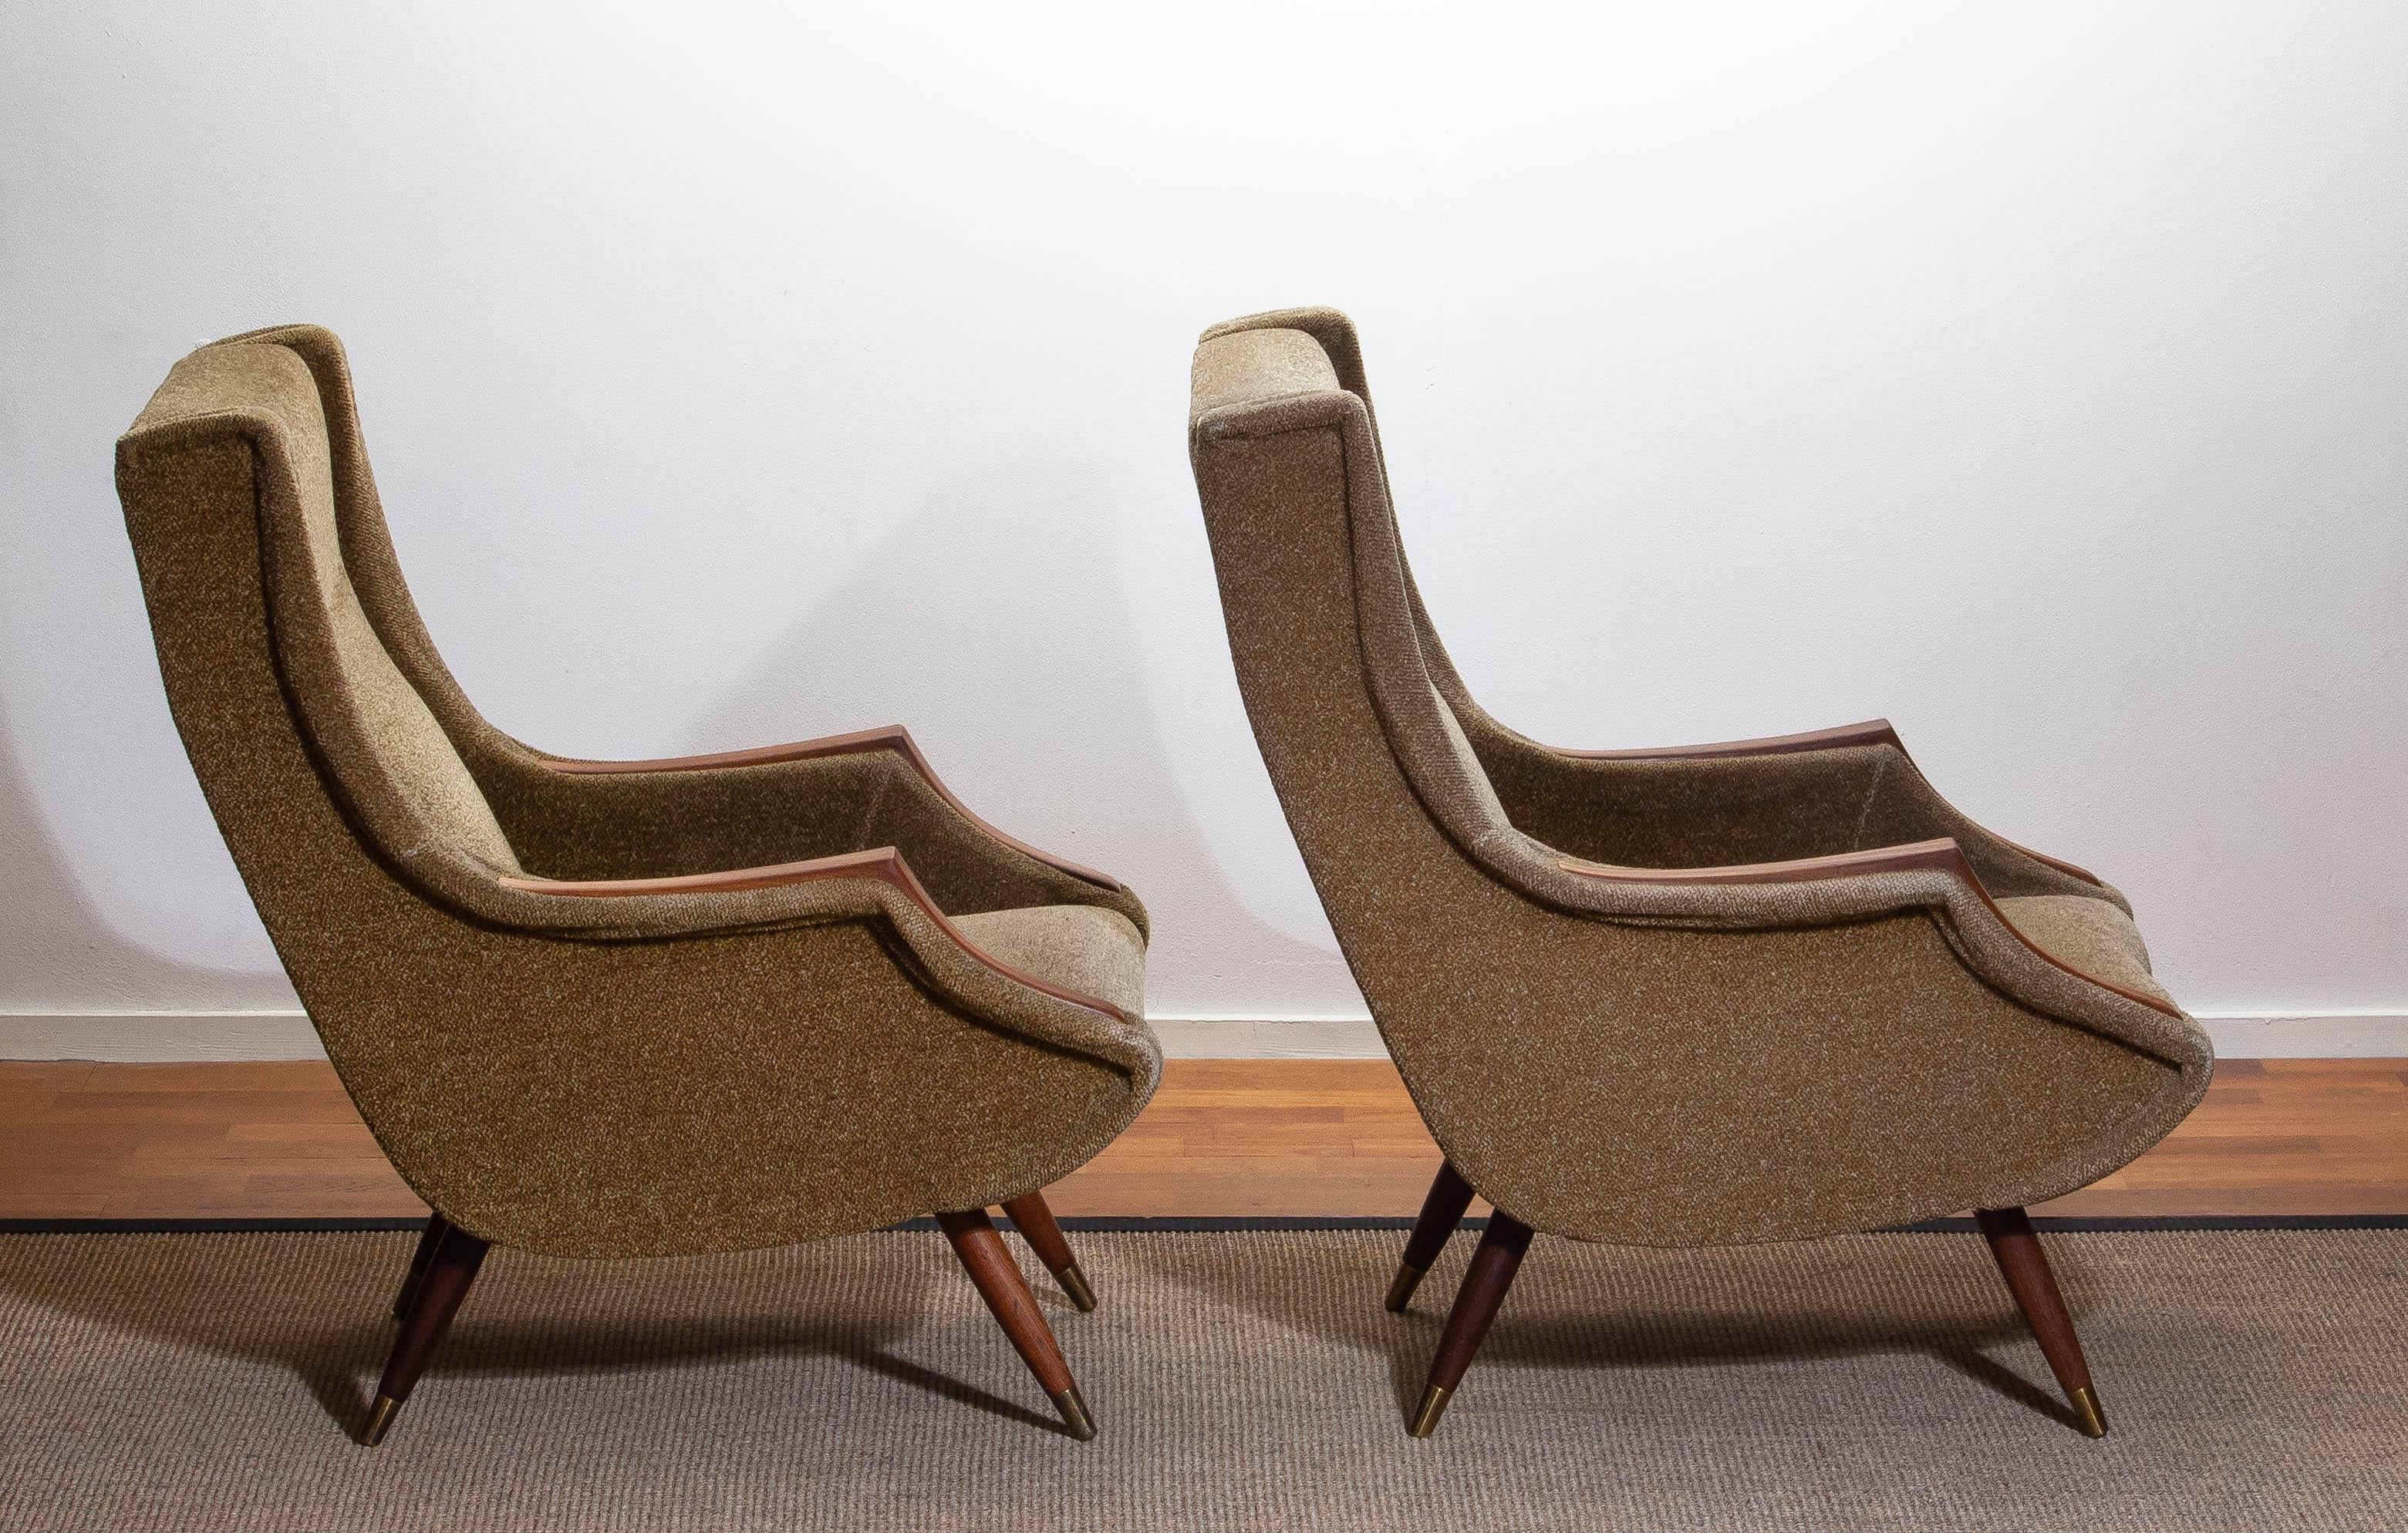 1950s, Set of Lounge Easy Club Chairs by Aldo Morbelli for Isa Bergamo, Italy 1